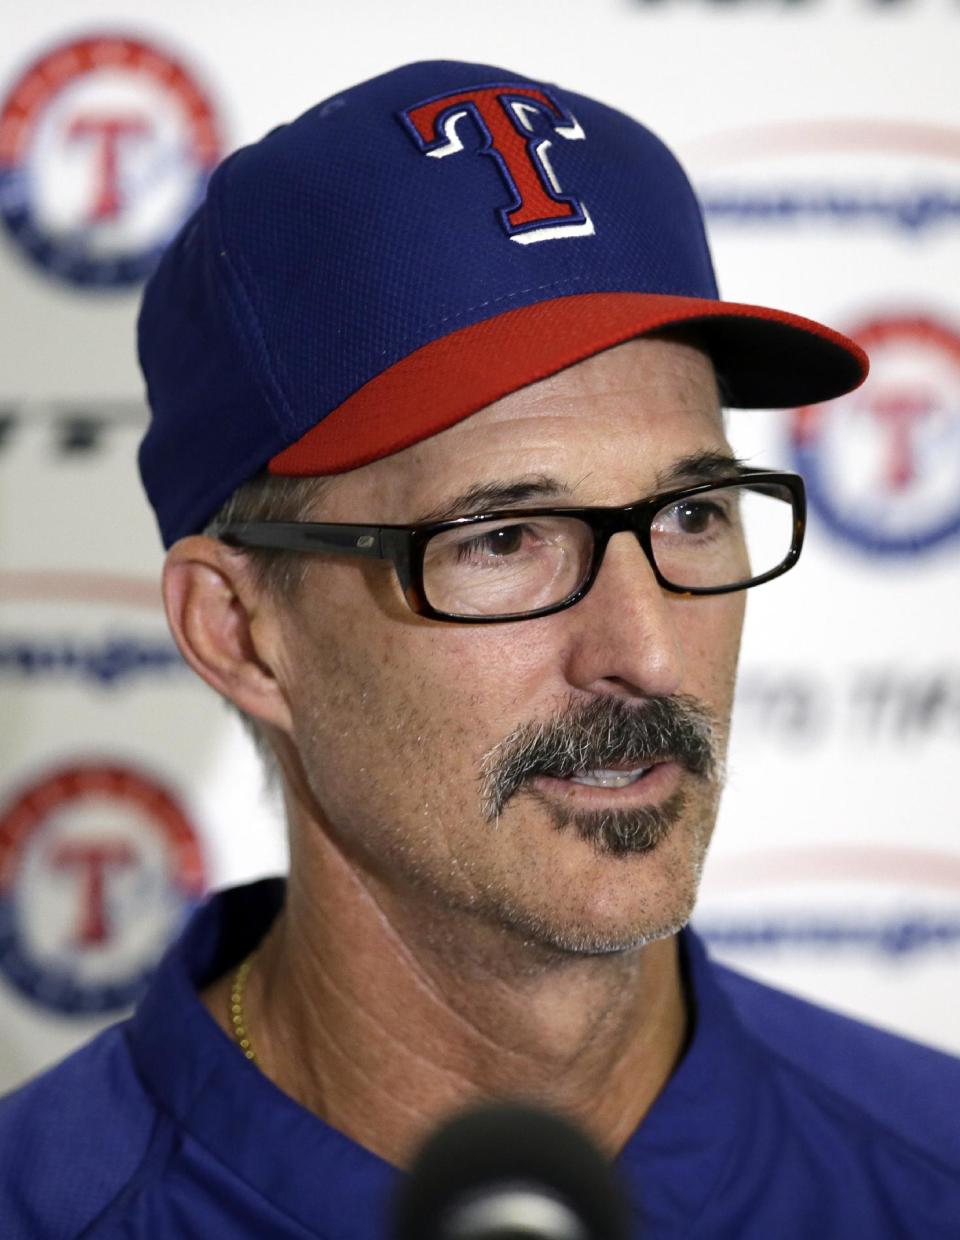 Texas Rangers pitching coach Mike Maddux responds to questions about Yu Darvish's throwing session during spring training baseball practice, Tuesday, Feb. 18, 2014, in Surprise, Ariz. (AP Photo/Tony Gutierrez)